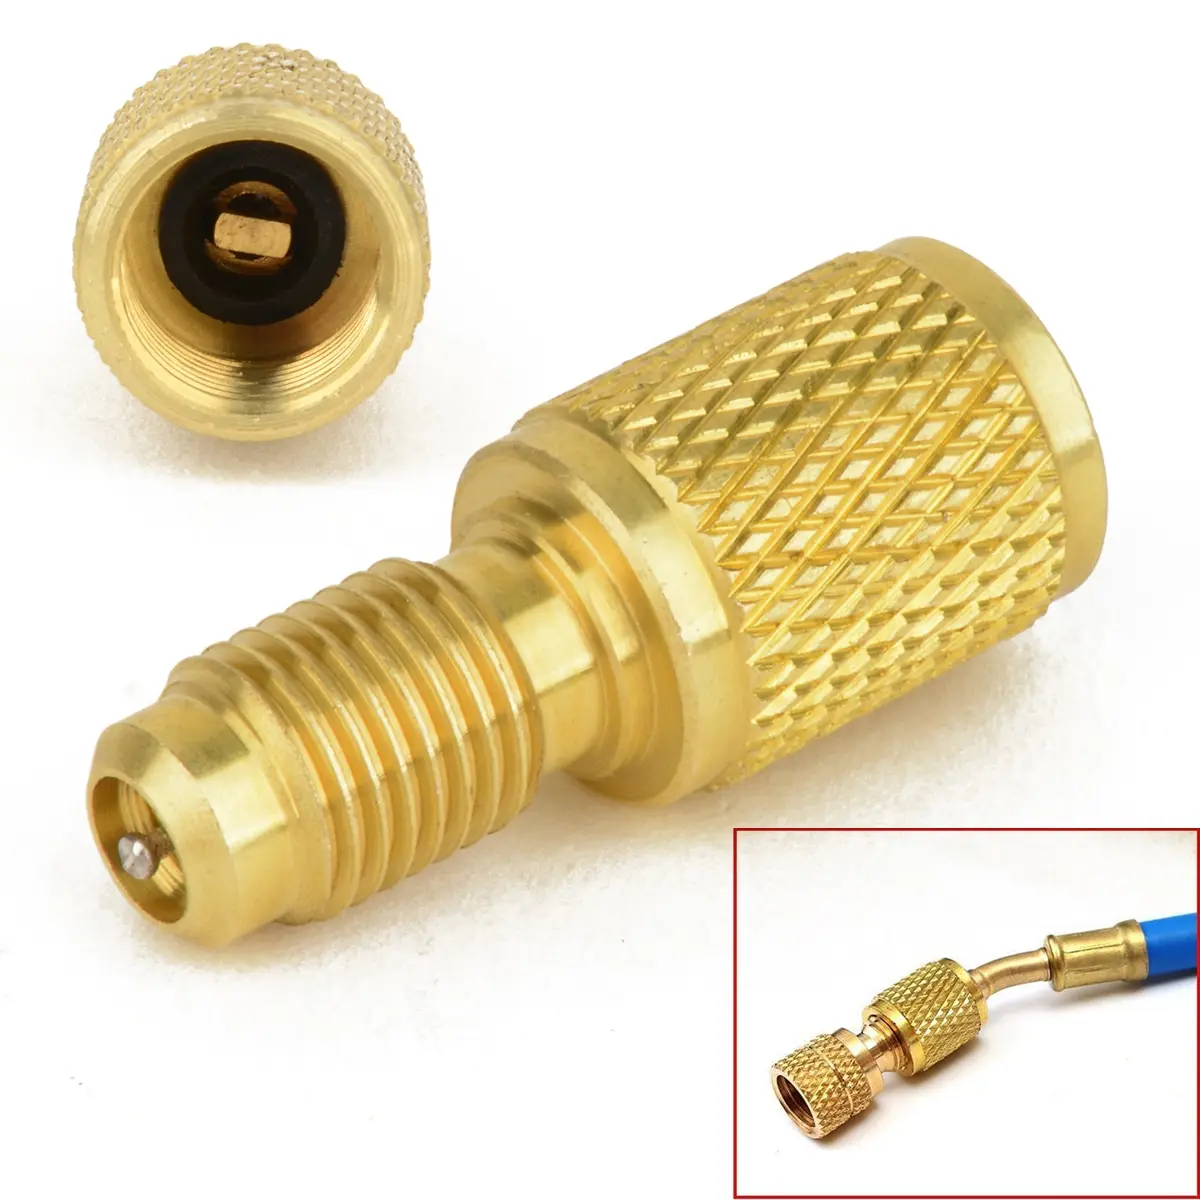 ACME A/C R134a Refrigerant Tank Brass Fitting Adapter 1/4" Male To 1/2" Female 